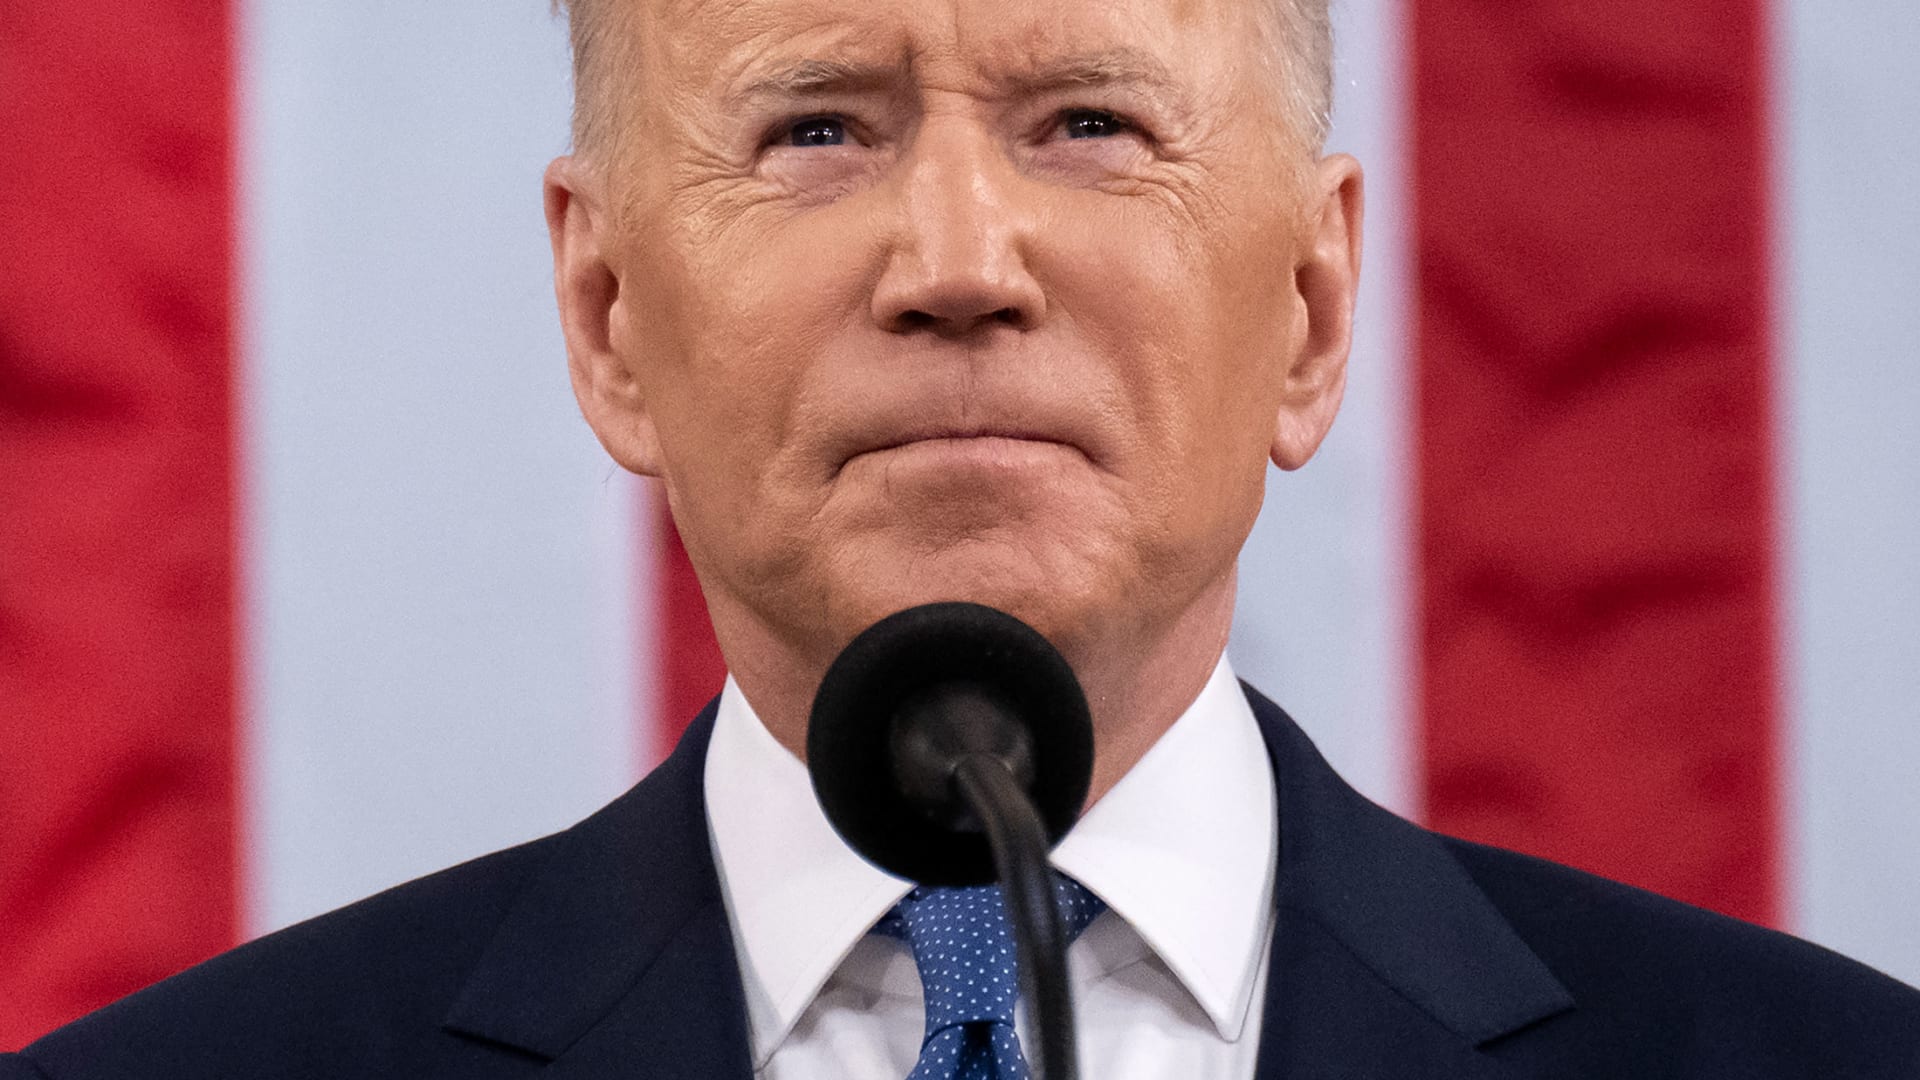 President Biden delivers the State of the Union address to a joint session of Congress in the U.S. Capitol House Chamber on Tuesday.